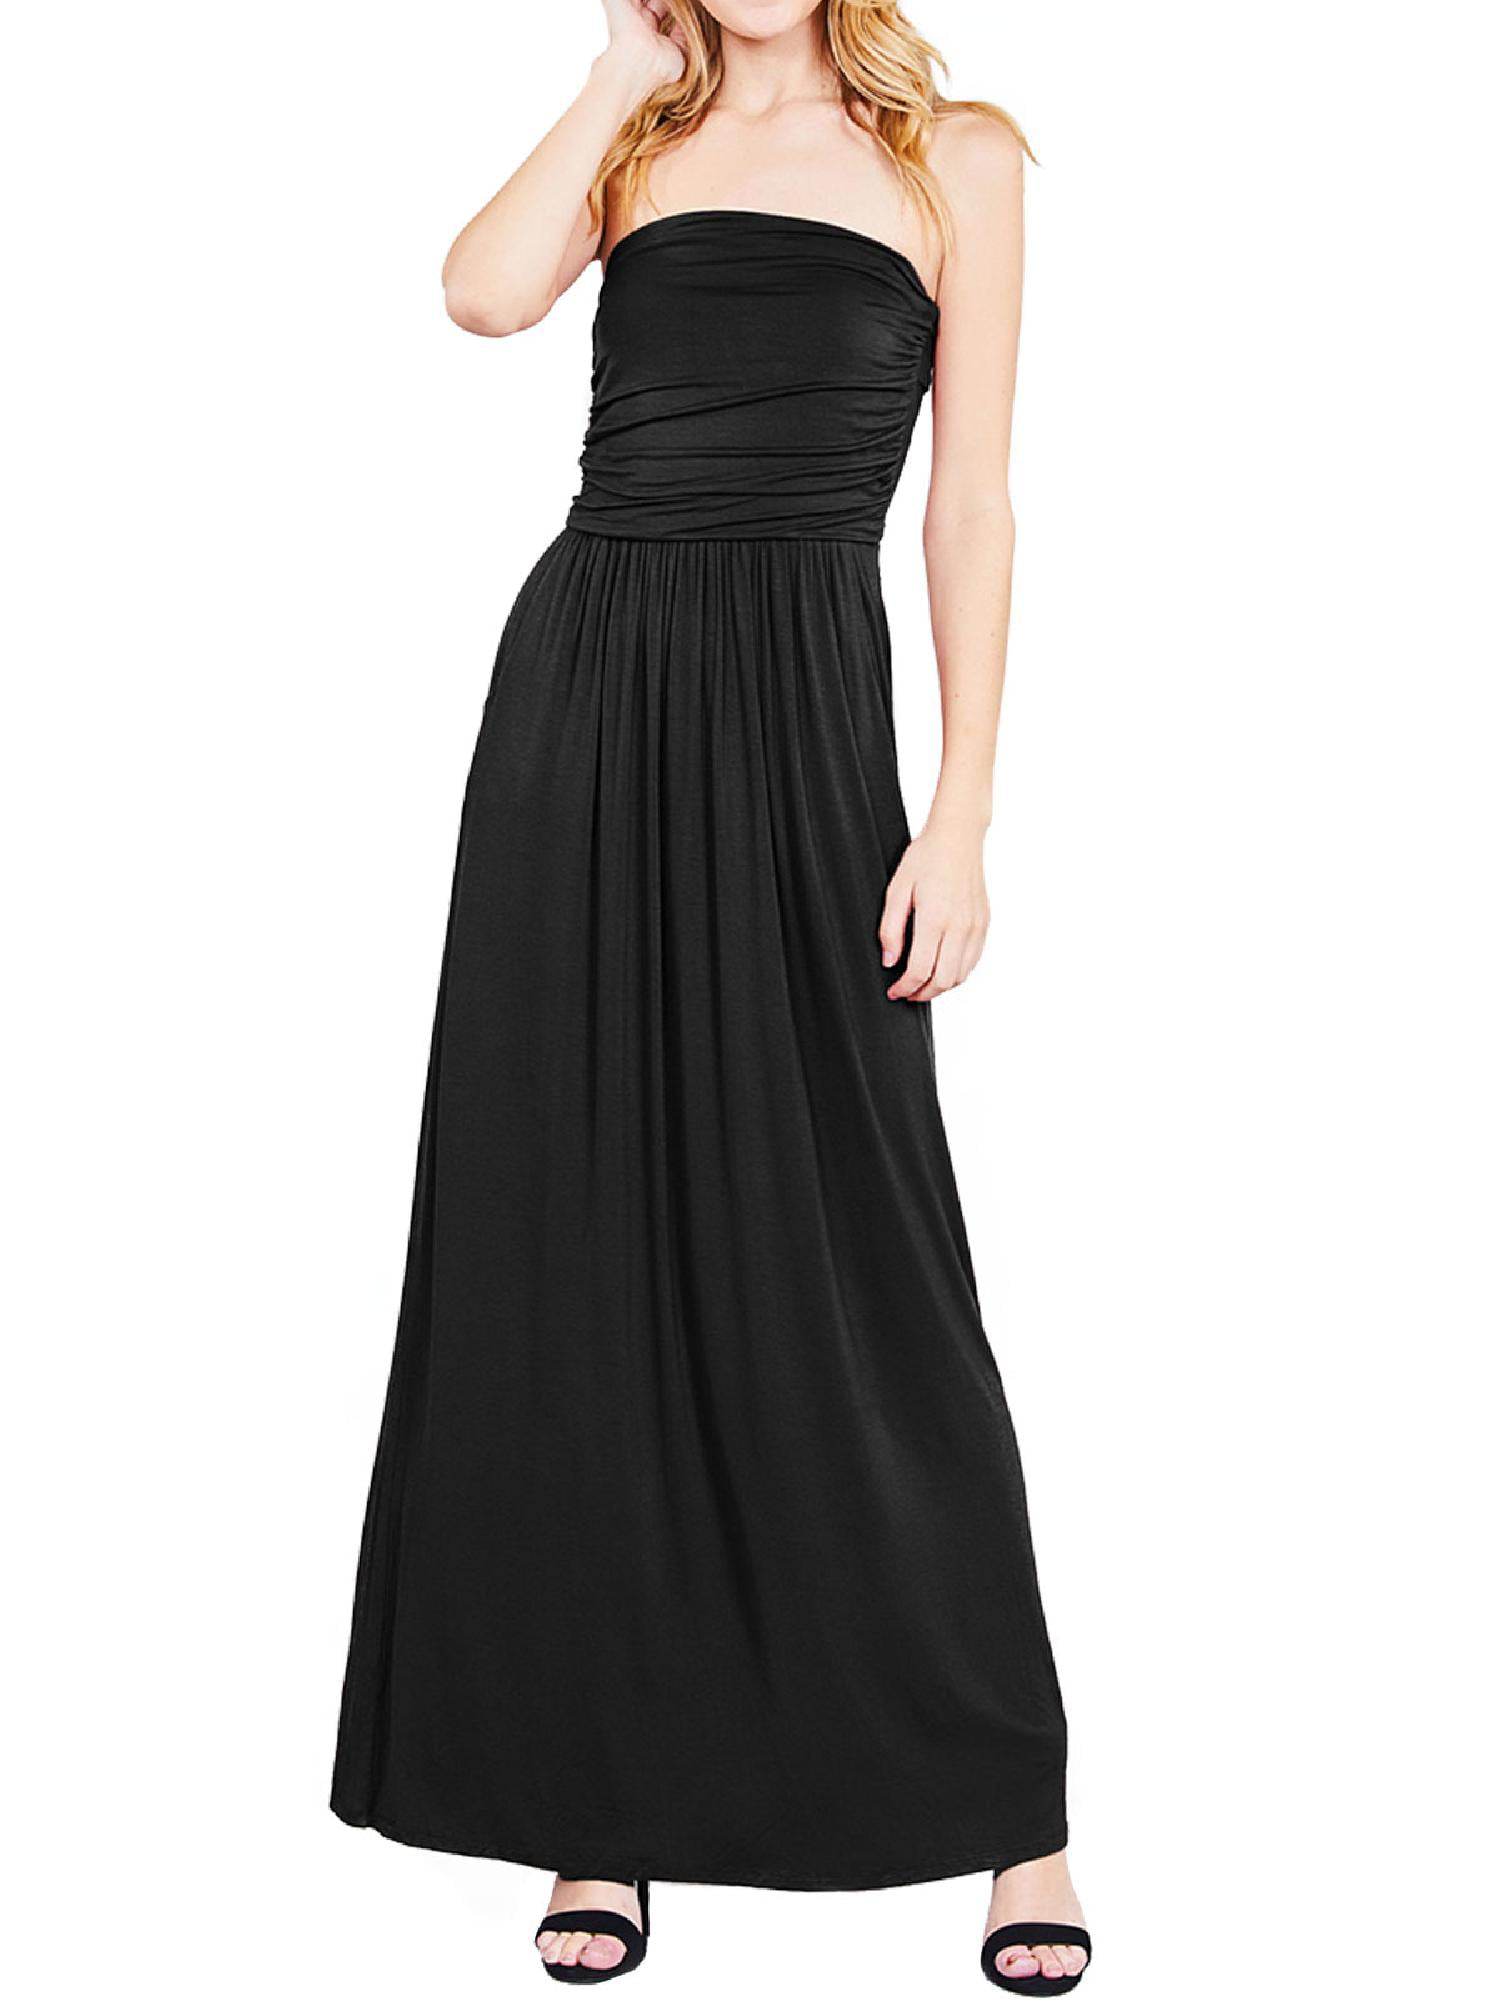 Made by Olivia - Made by Olivia Women's Strapless Ruched Casual Maxi ...